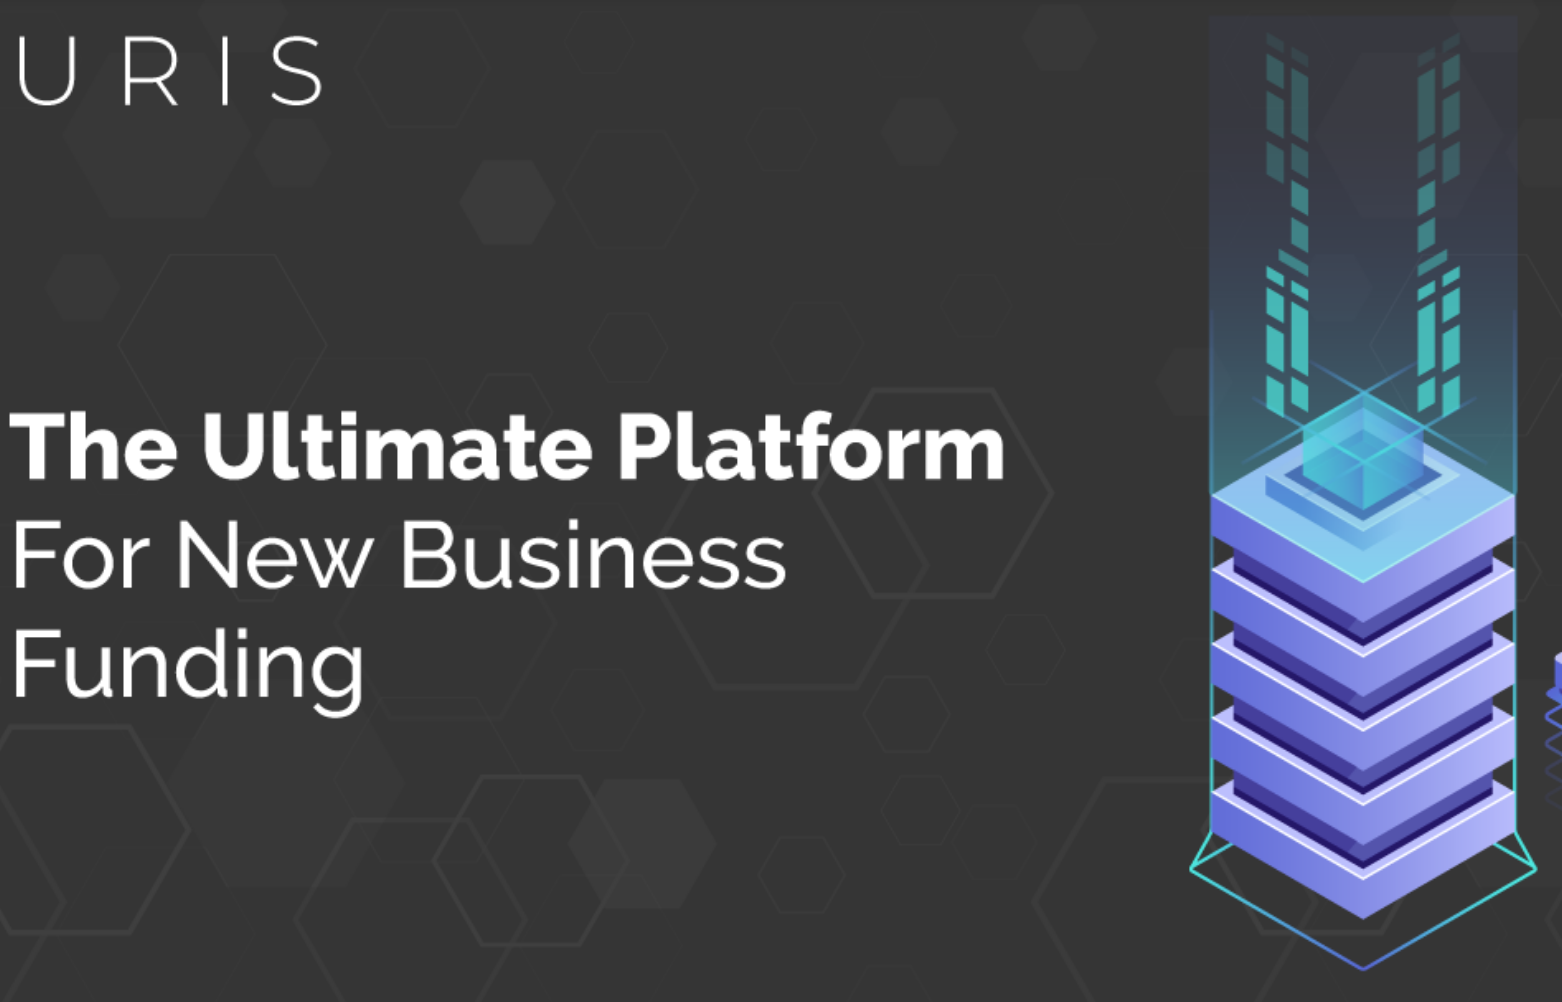 The Ultimate Platform For New Business Funding